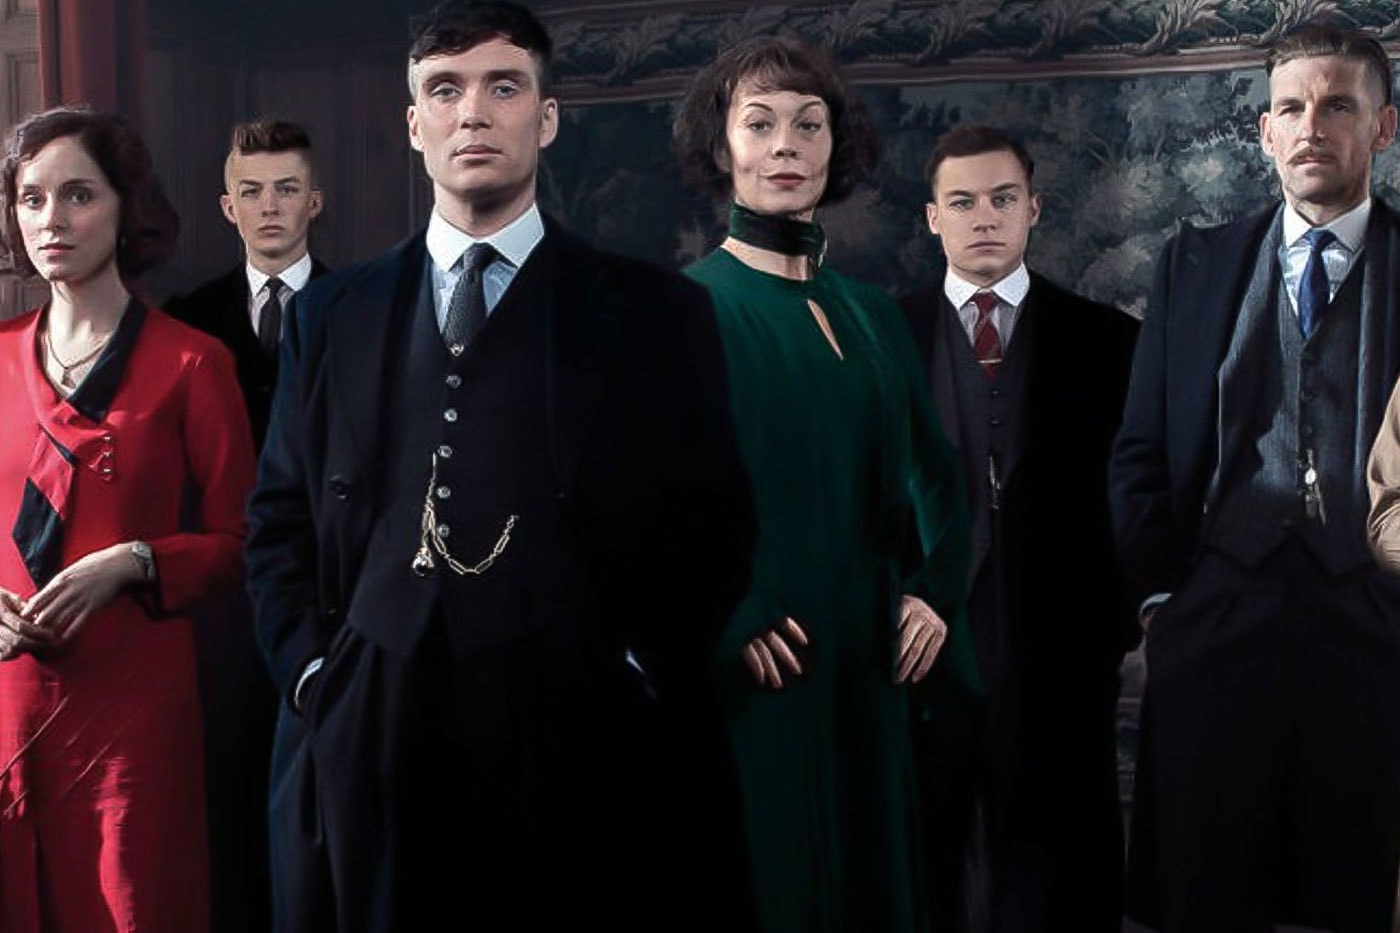 'Peaky Blinders' Finale Confirmed To Be a Feature-Length Episode anthony byrne steven knight bbc one netflix tommy shelby cillian murphy helen mccrory paul anderson tom hardy